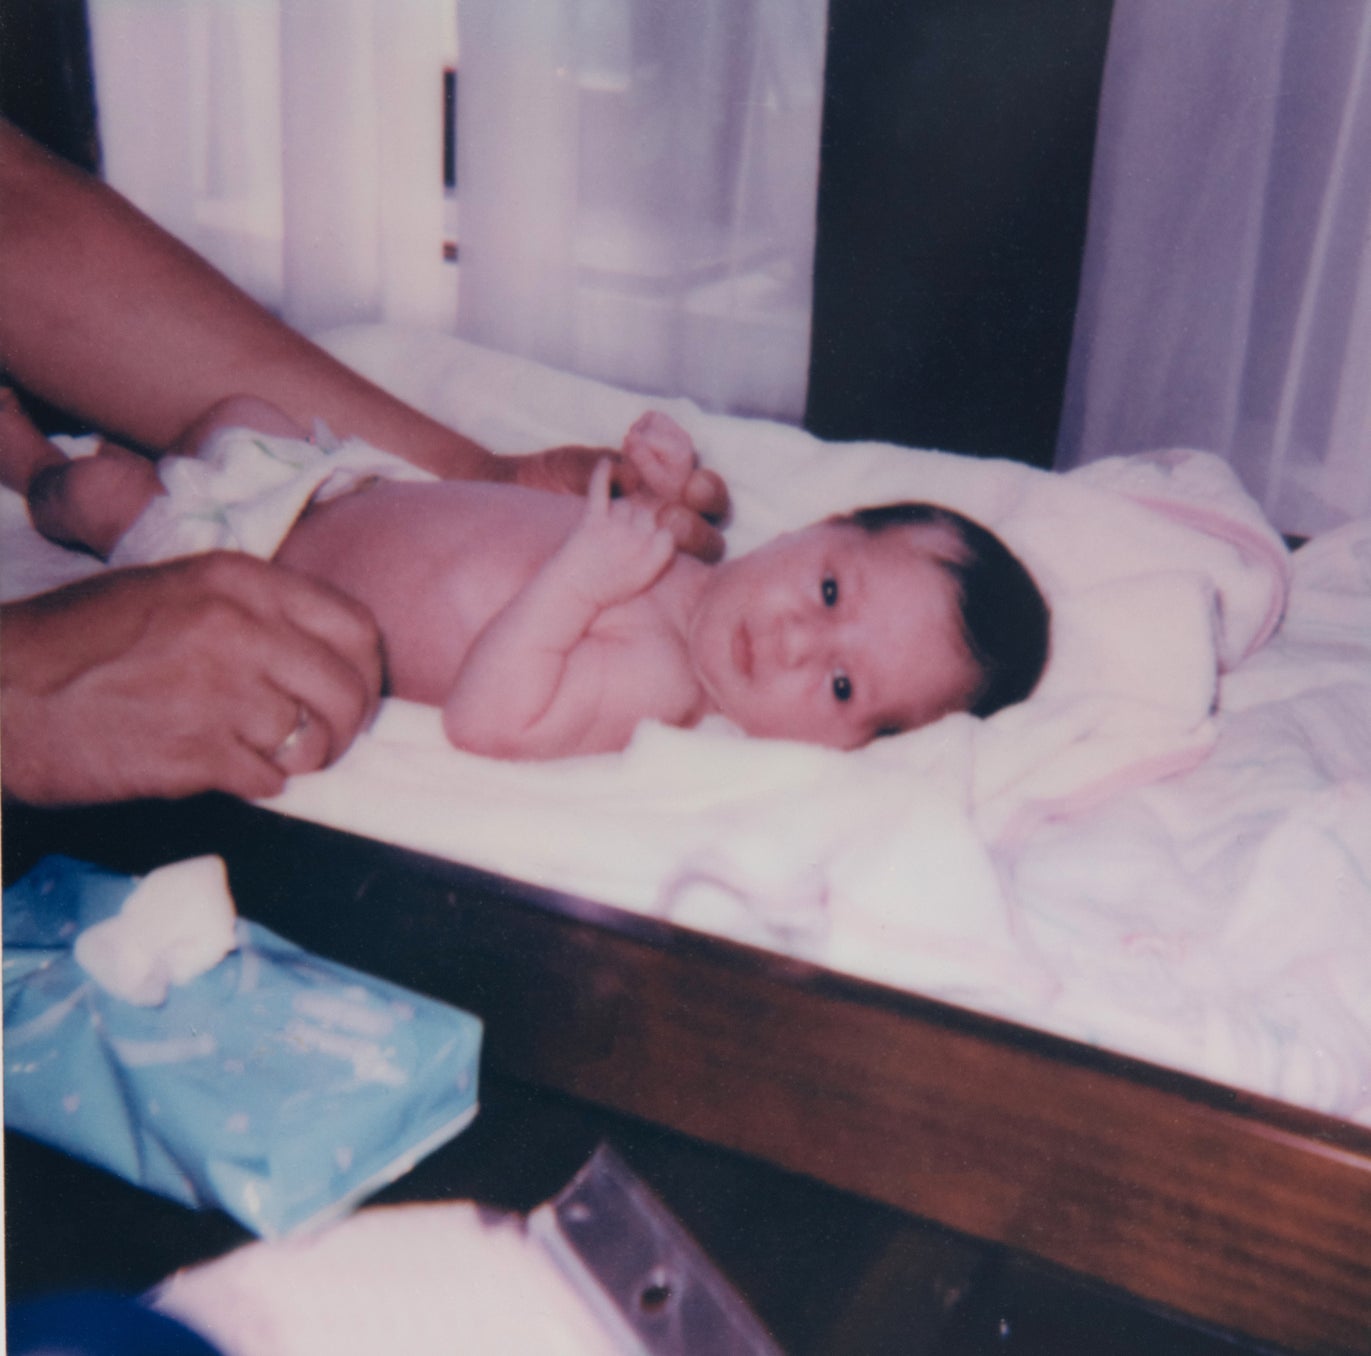 Infant lying on a changing table with an adult&#x27;s hands gently securing the baby